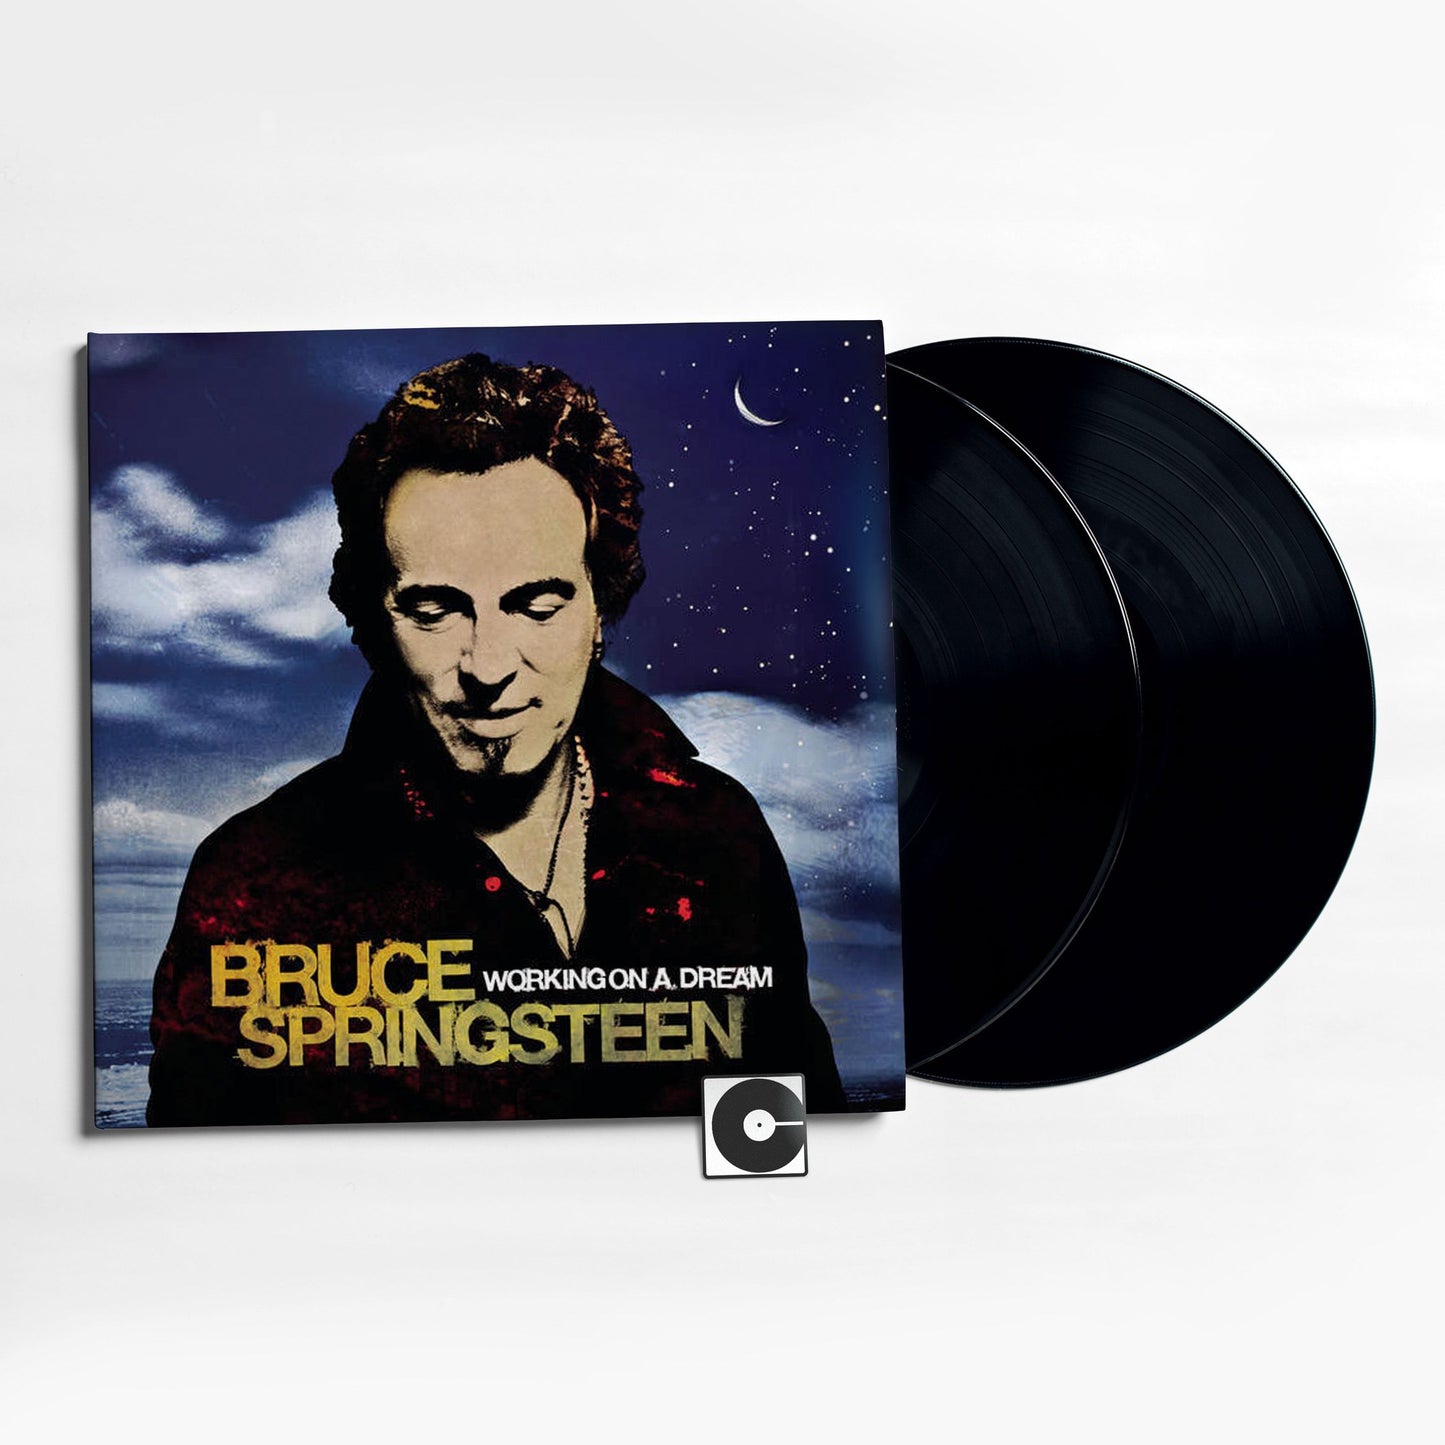 Bruce Springsteen - "Working on A Dream"